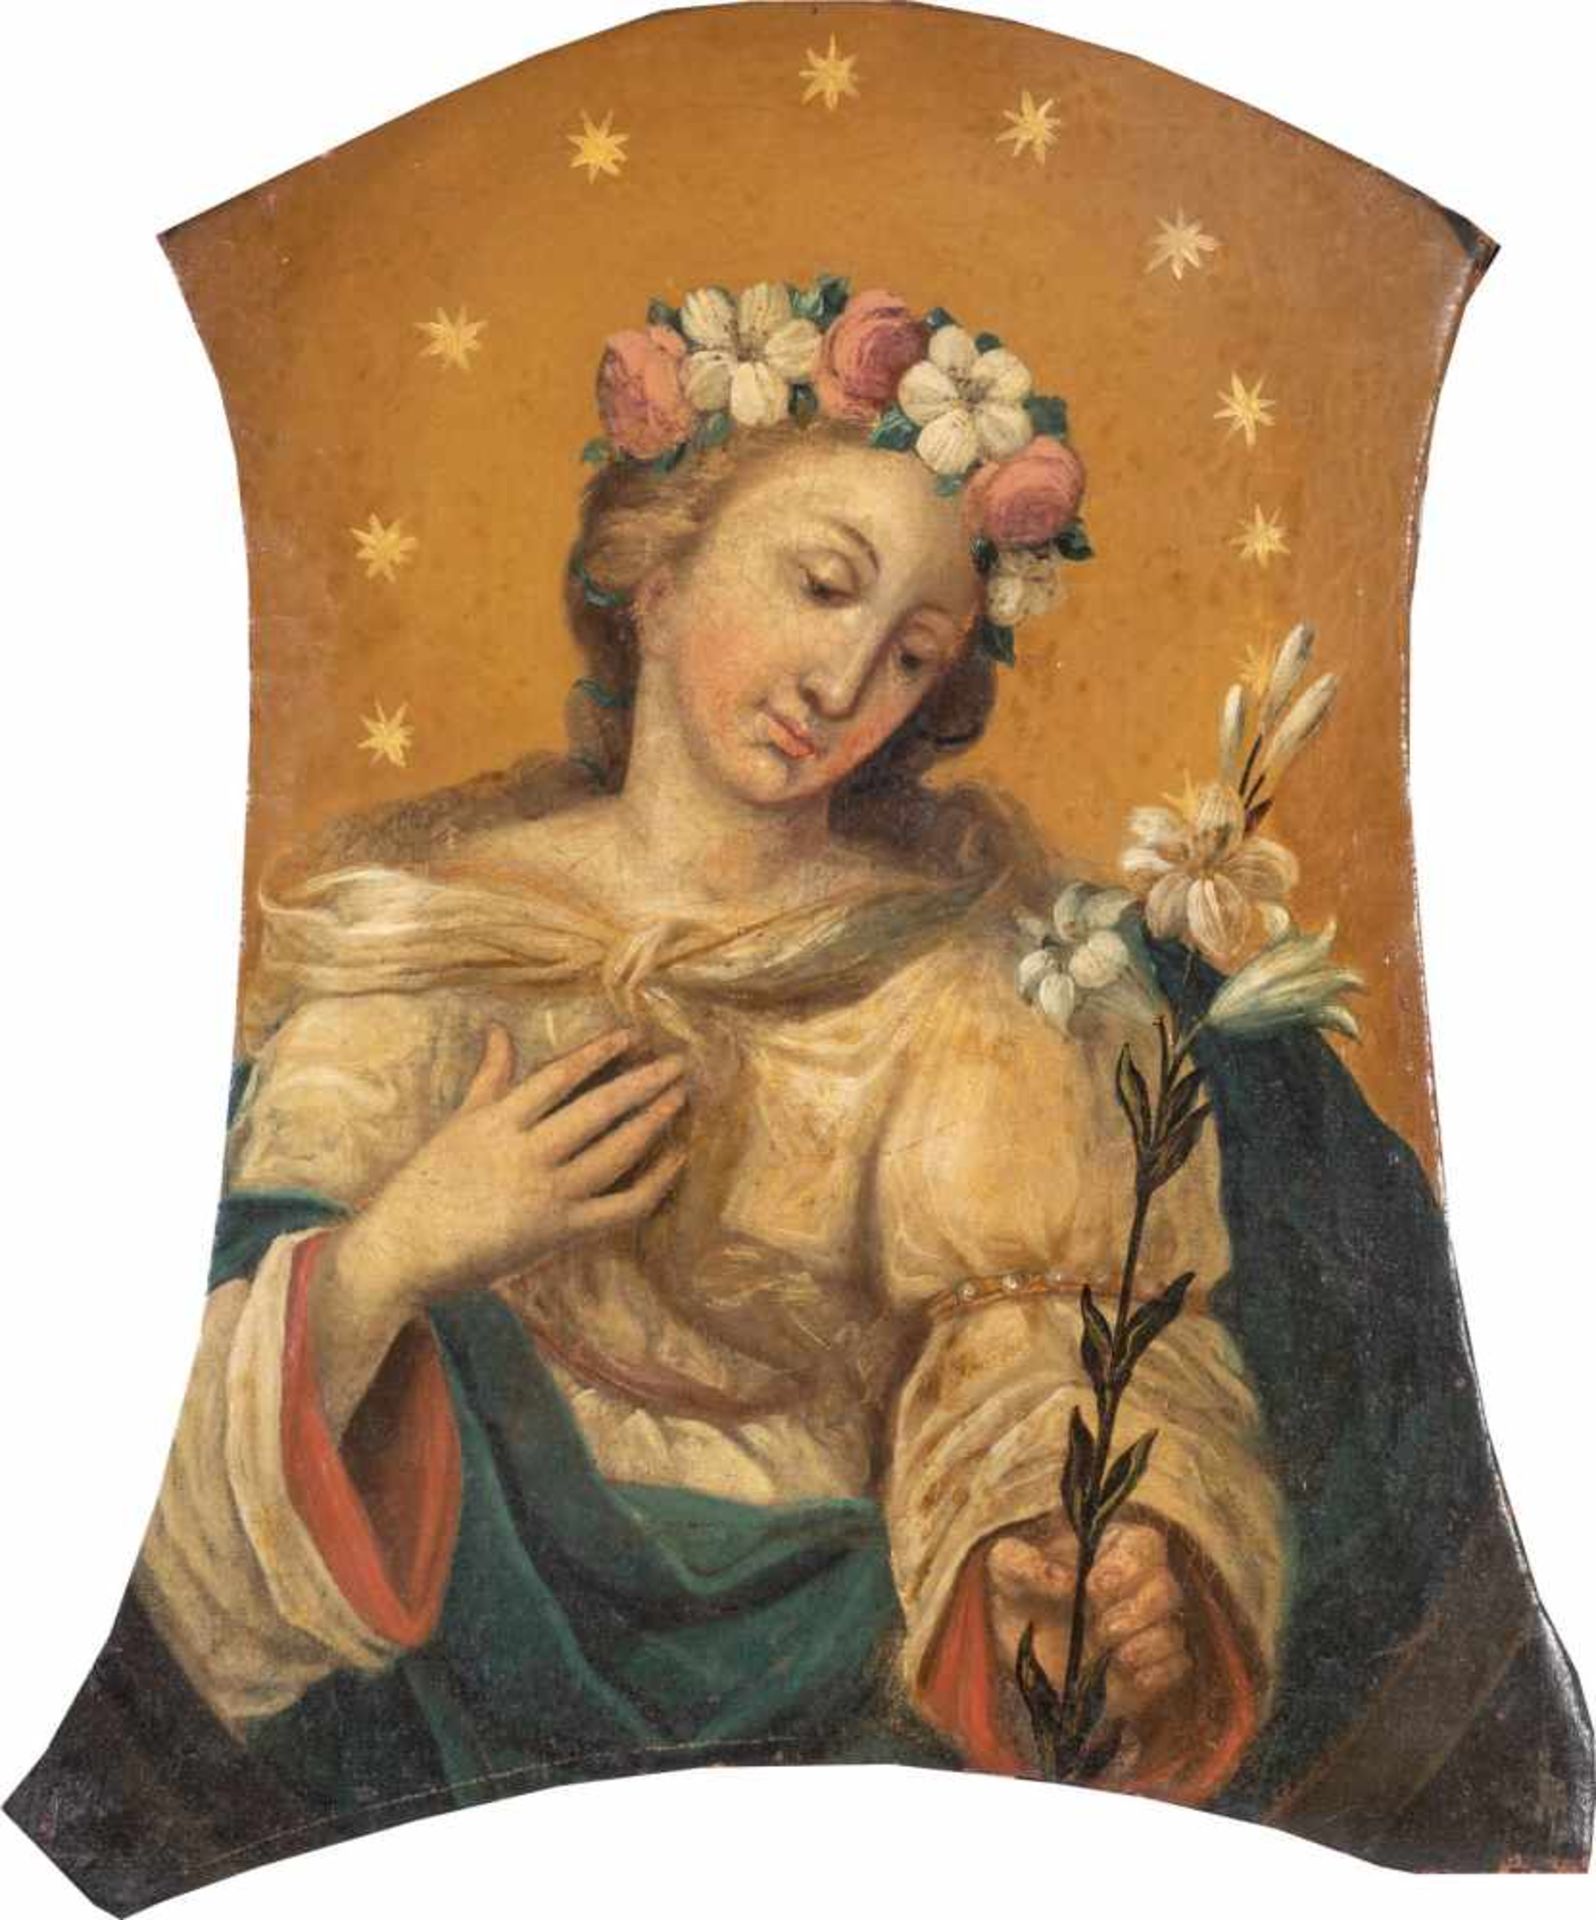 Holy Painter, Southern German, 18th century. Presentation of the Virgin Mary with flowerwreath and